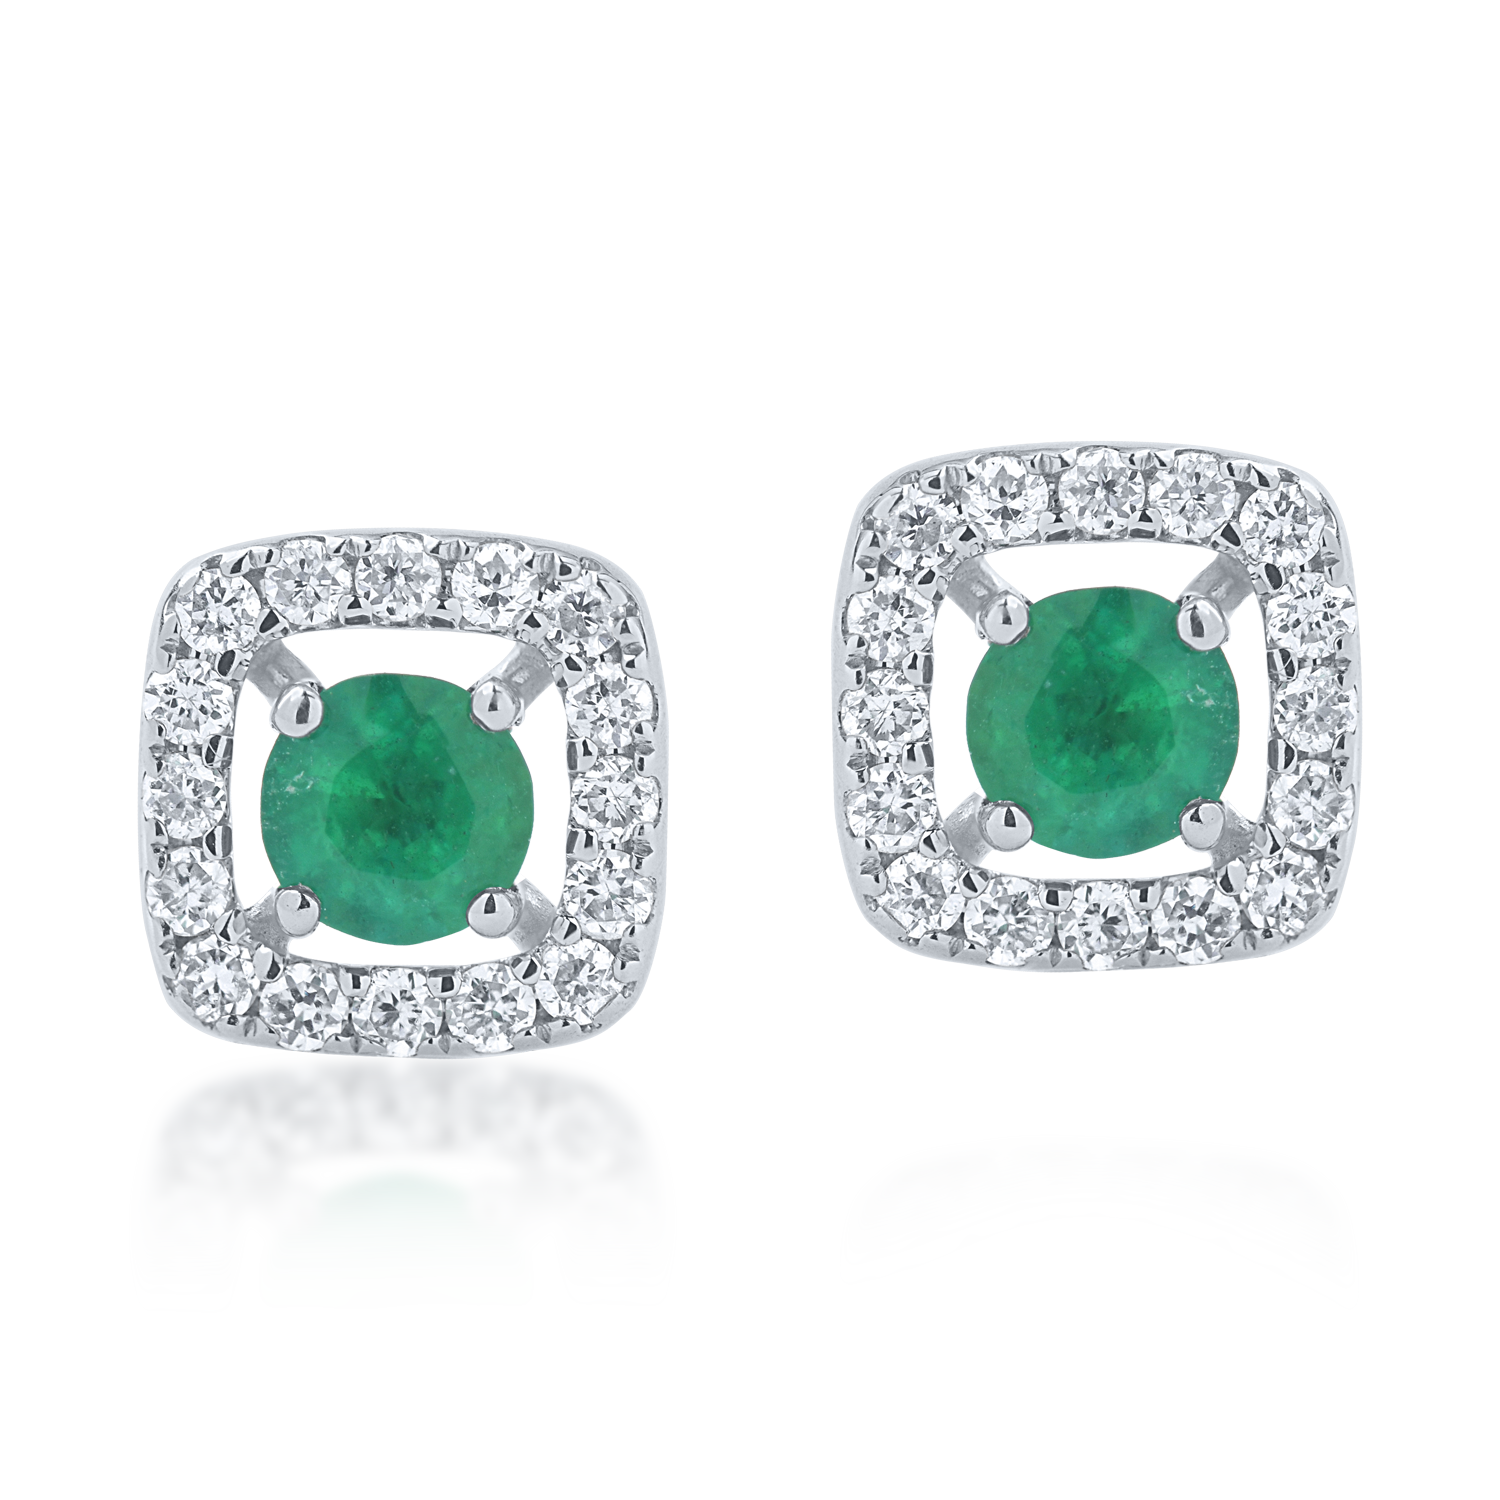 White gold earrings with 0.14ct emeralds and 0.08ct diamonds